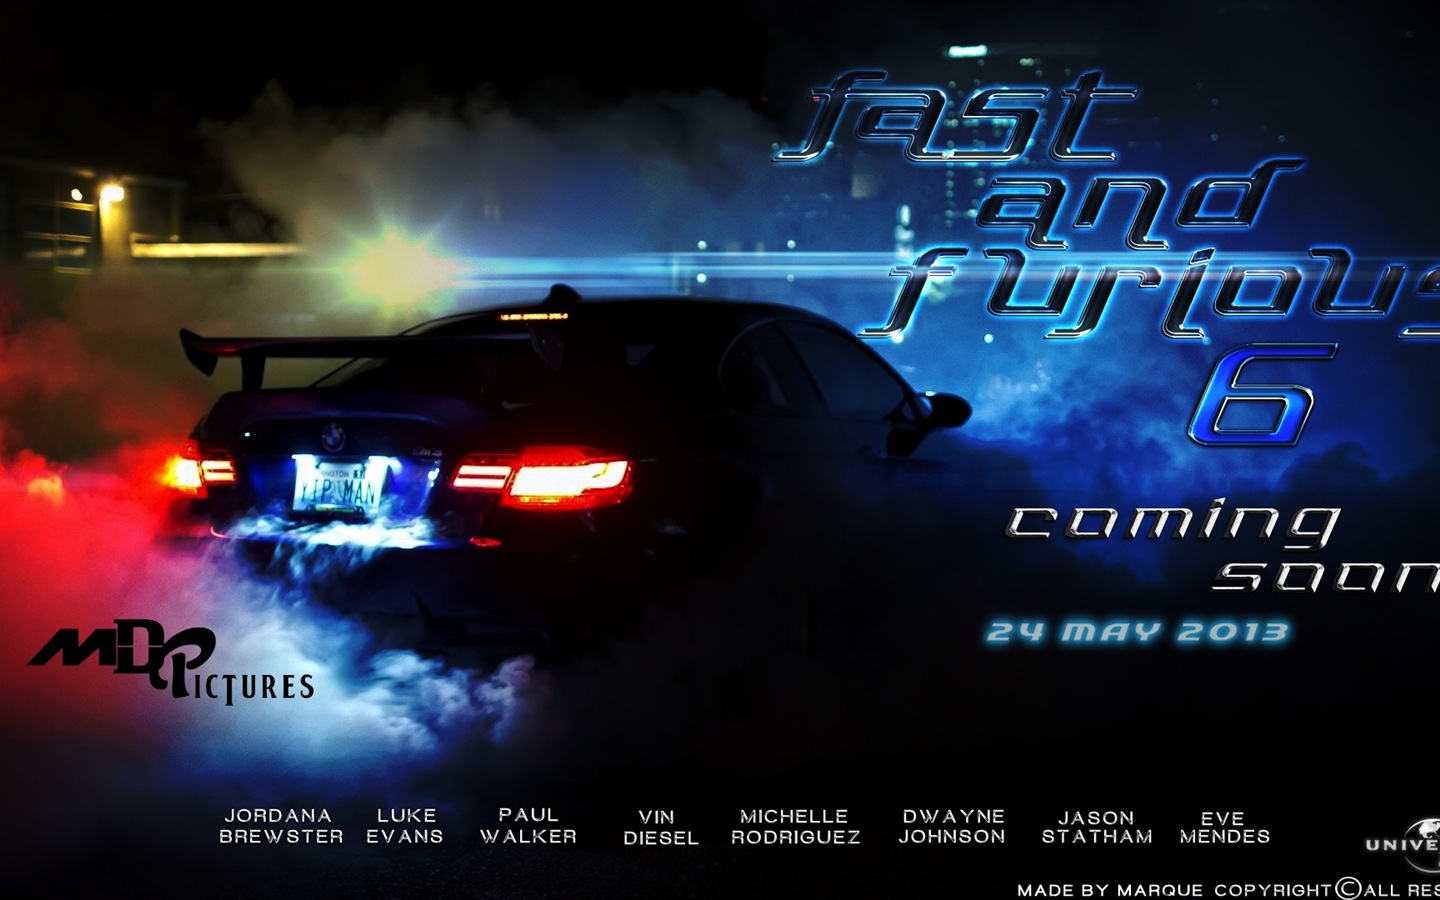 Fast And Furious 6 HD movie wallpapers #3 - 1440x900